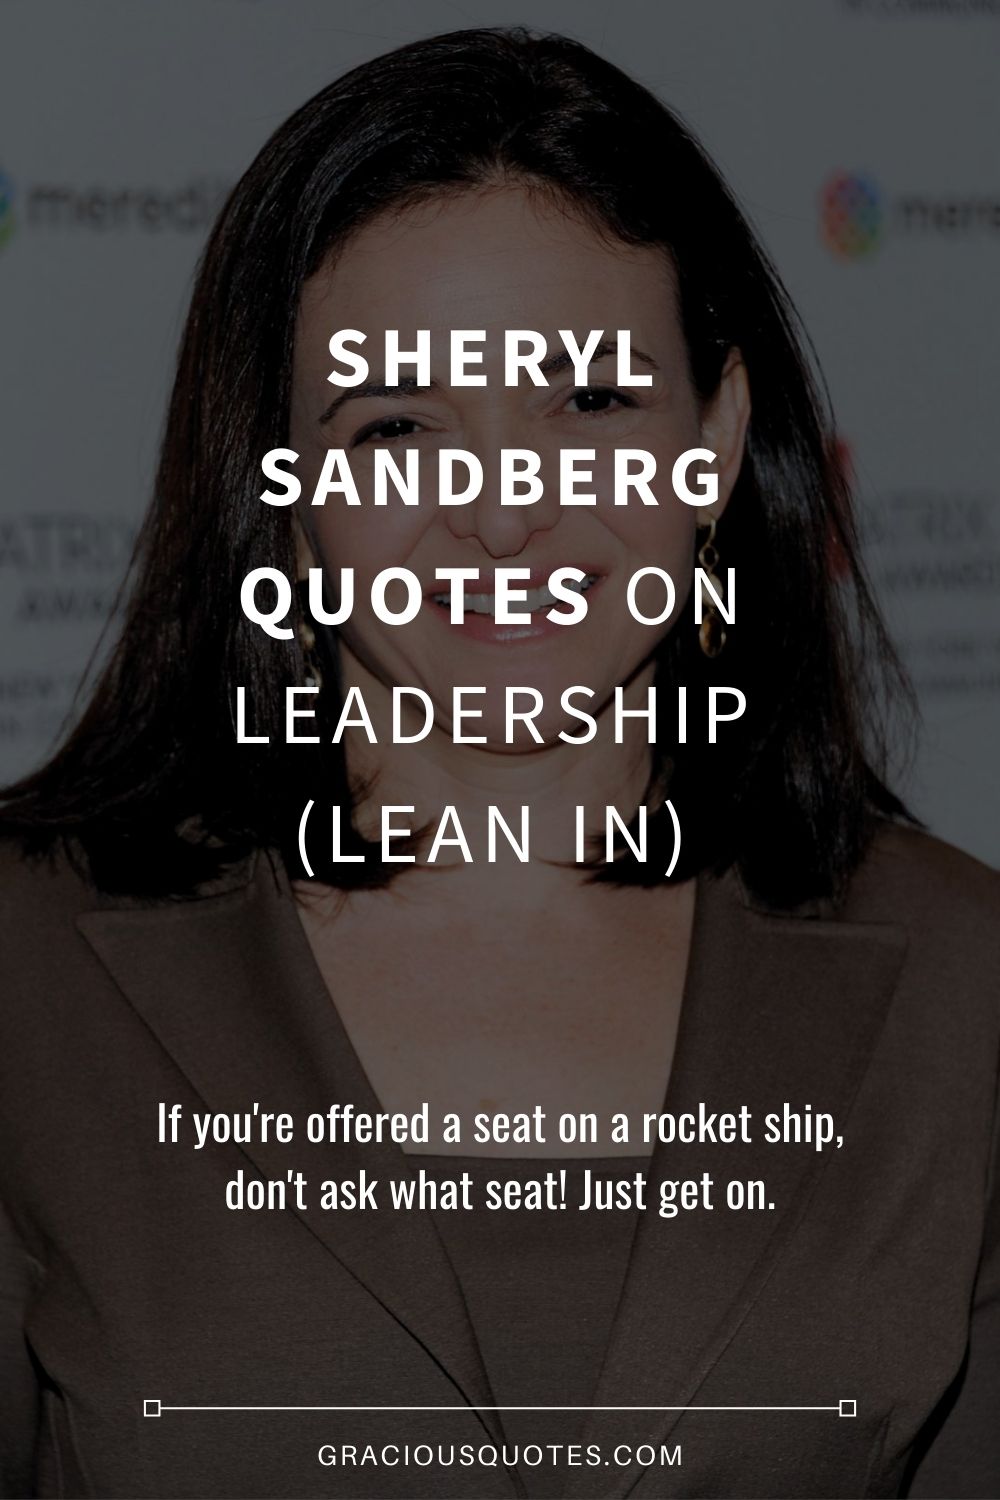 Sheryl Sandberg Quotes on Leadership (LEAN IN) - Gracious Quotes